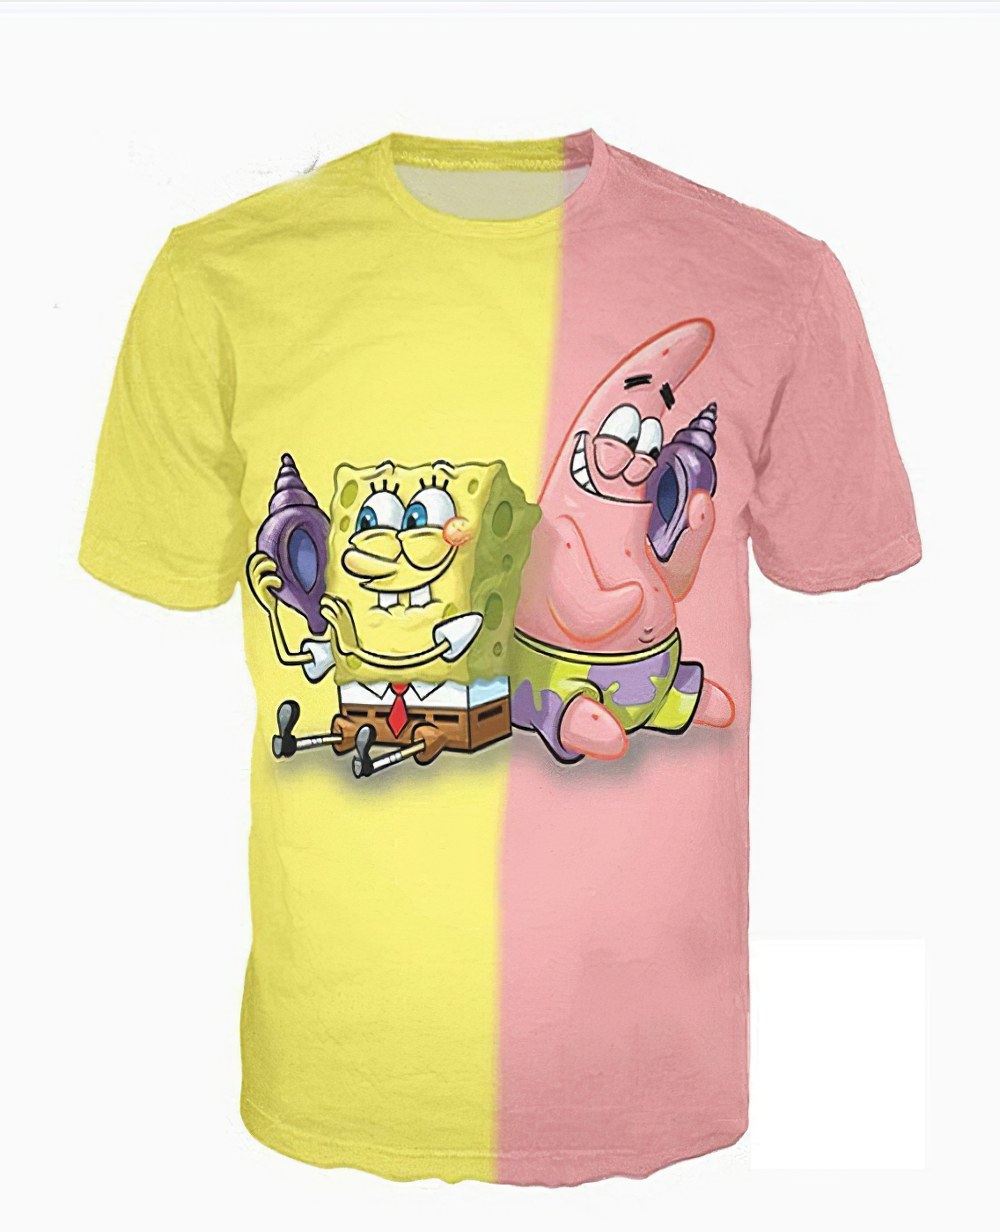 Gangster Spongebob Playing With Snail Shells 3d Shirt Plus Size Up To 5xl